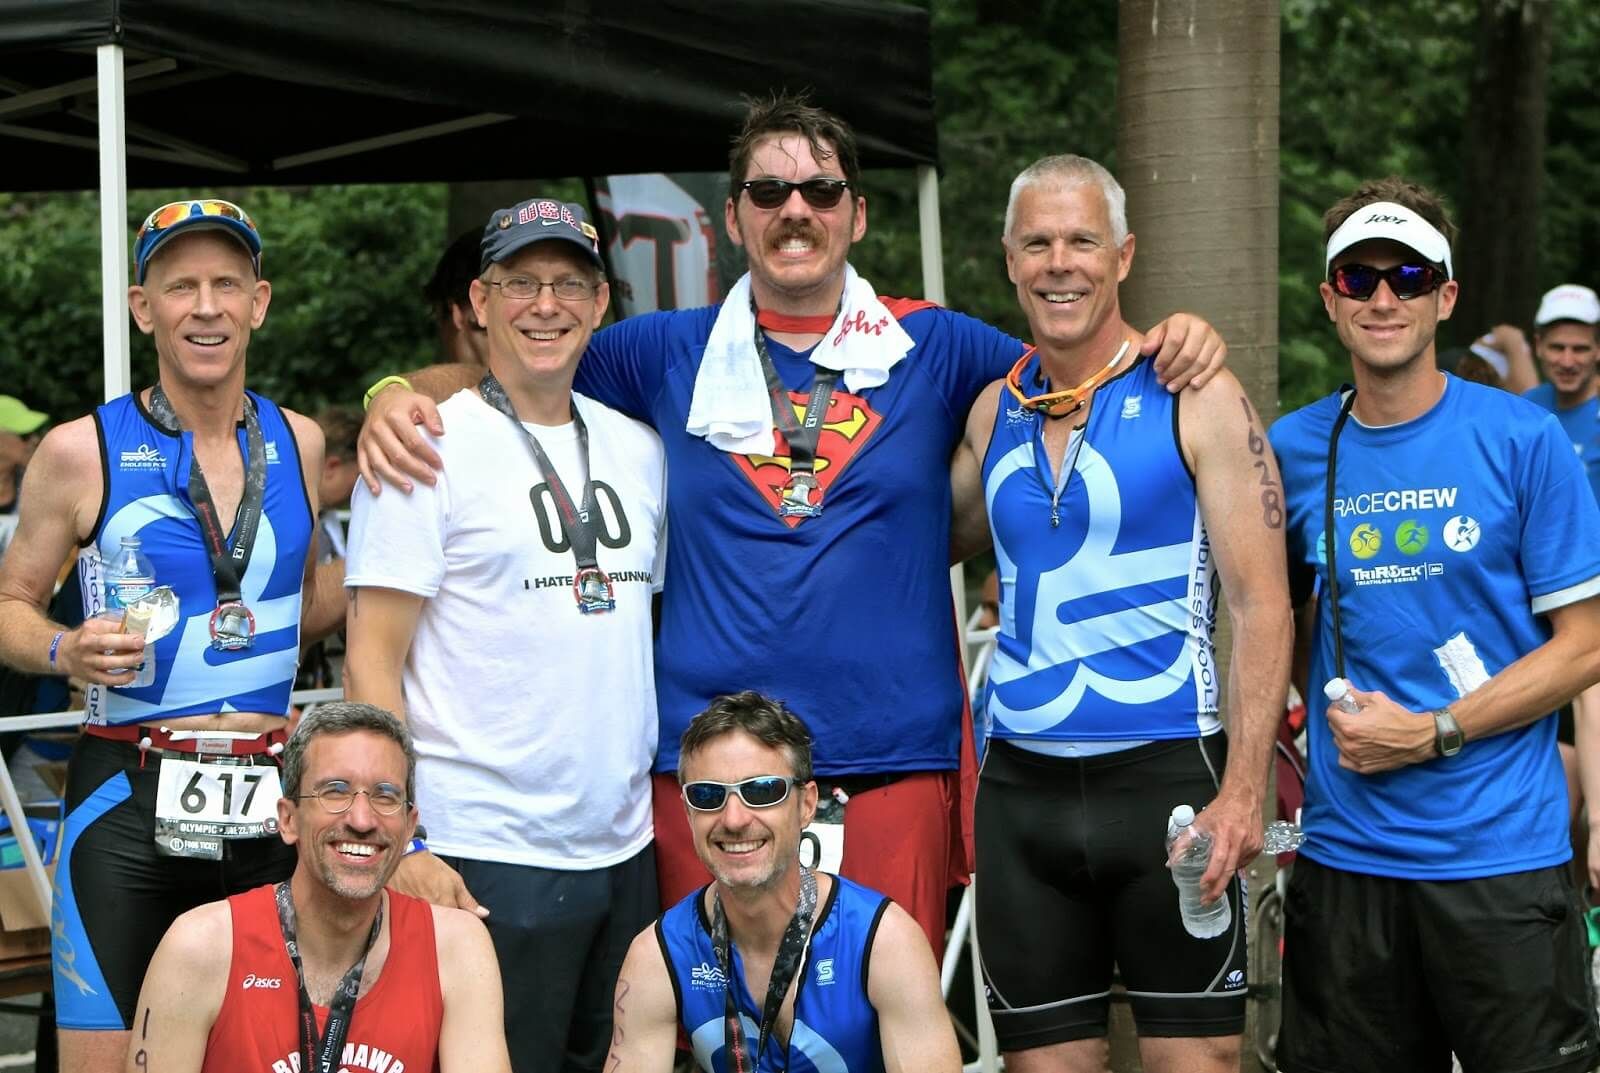 the men of Team Endless Pools at the TriRock Philly triathlon